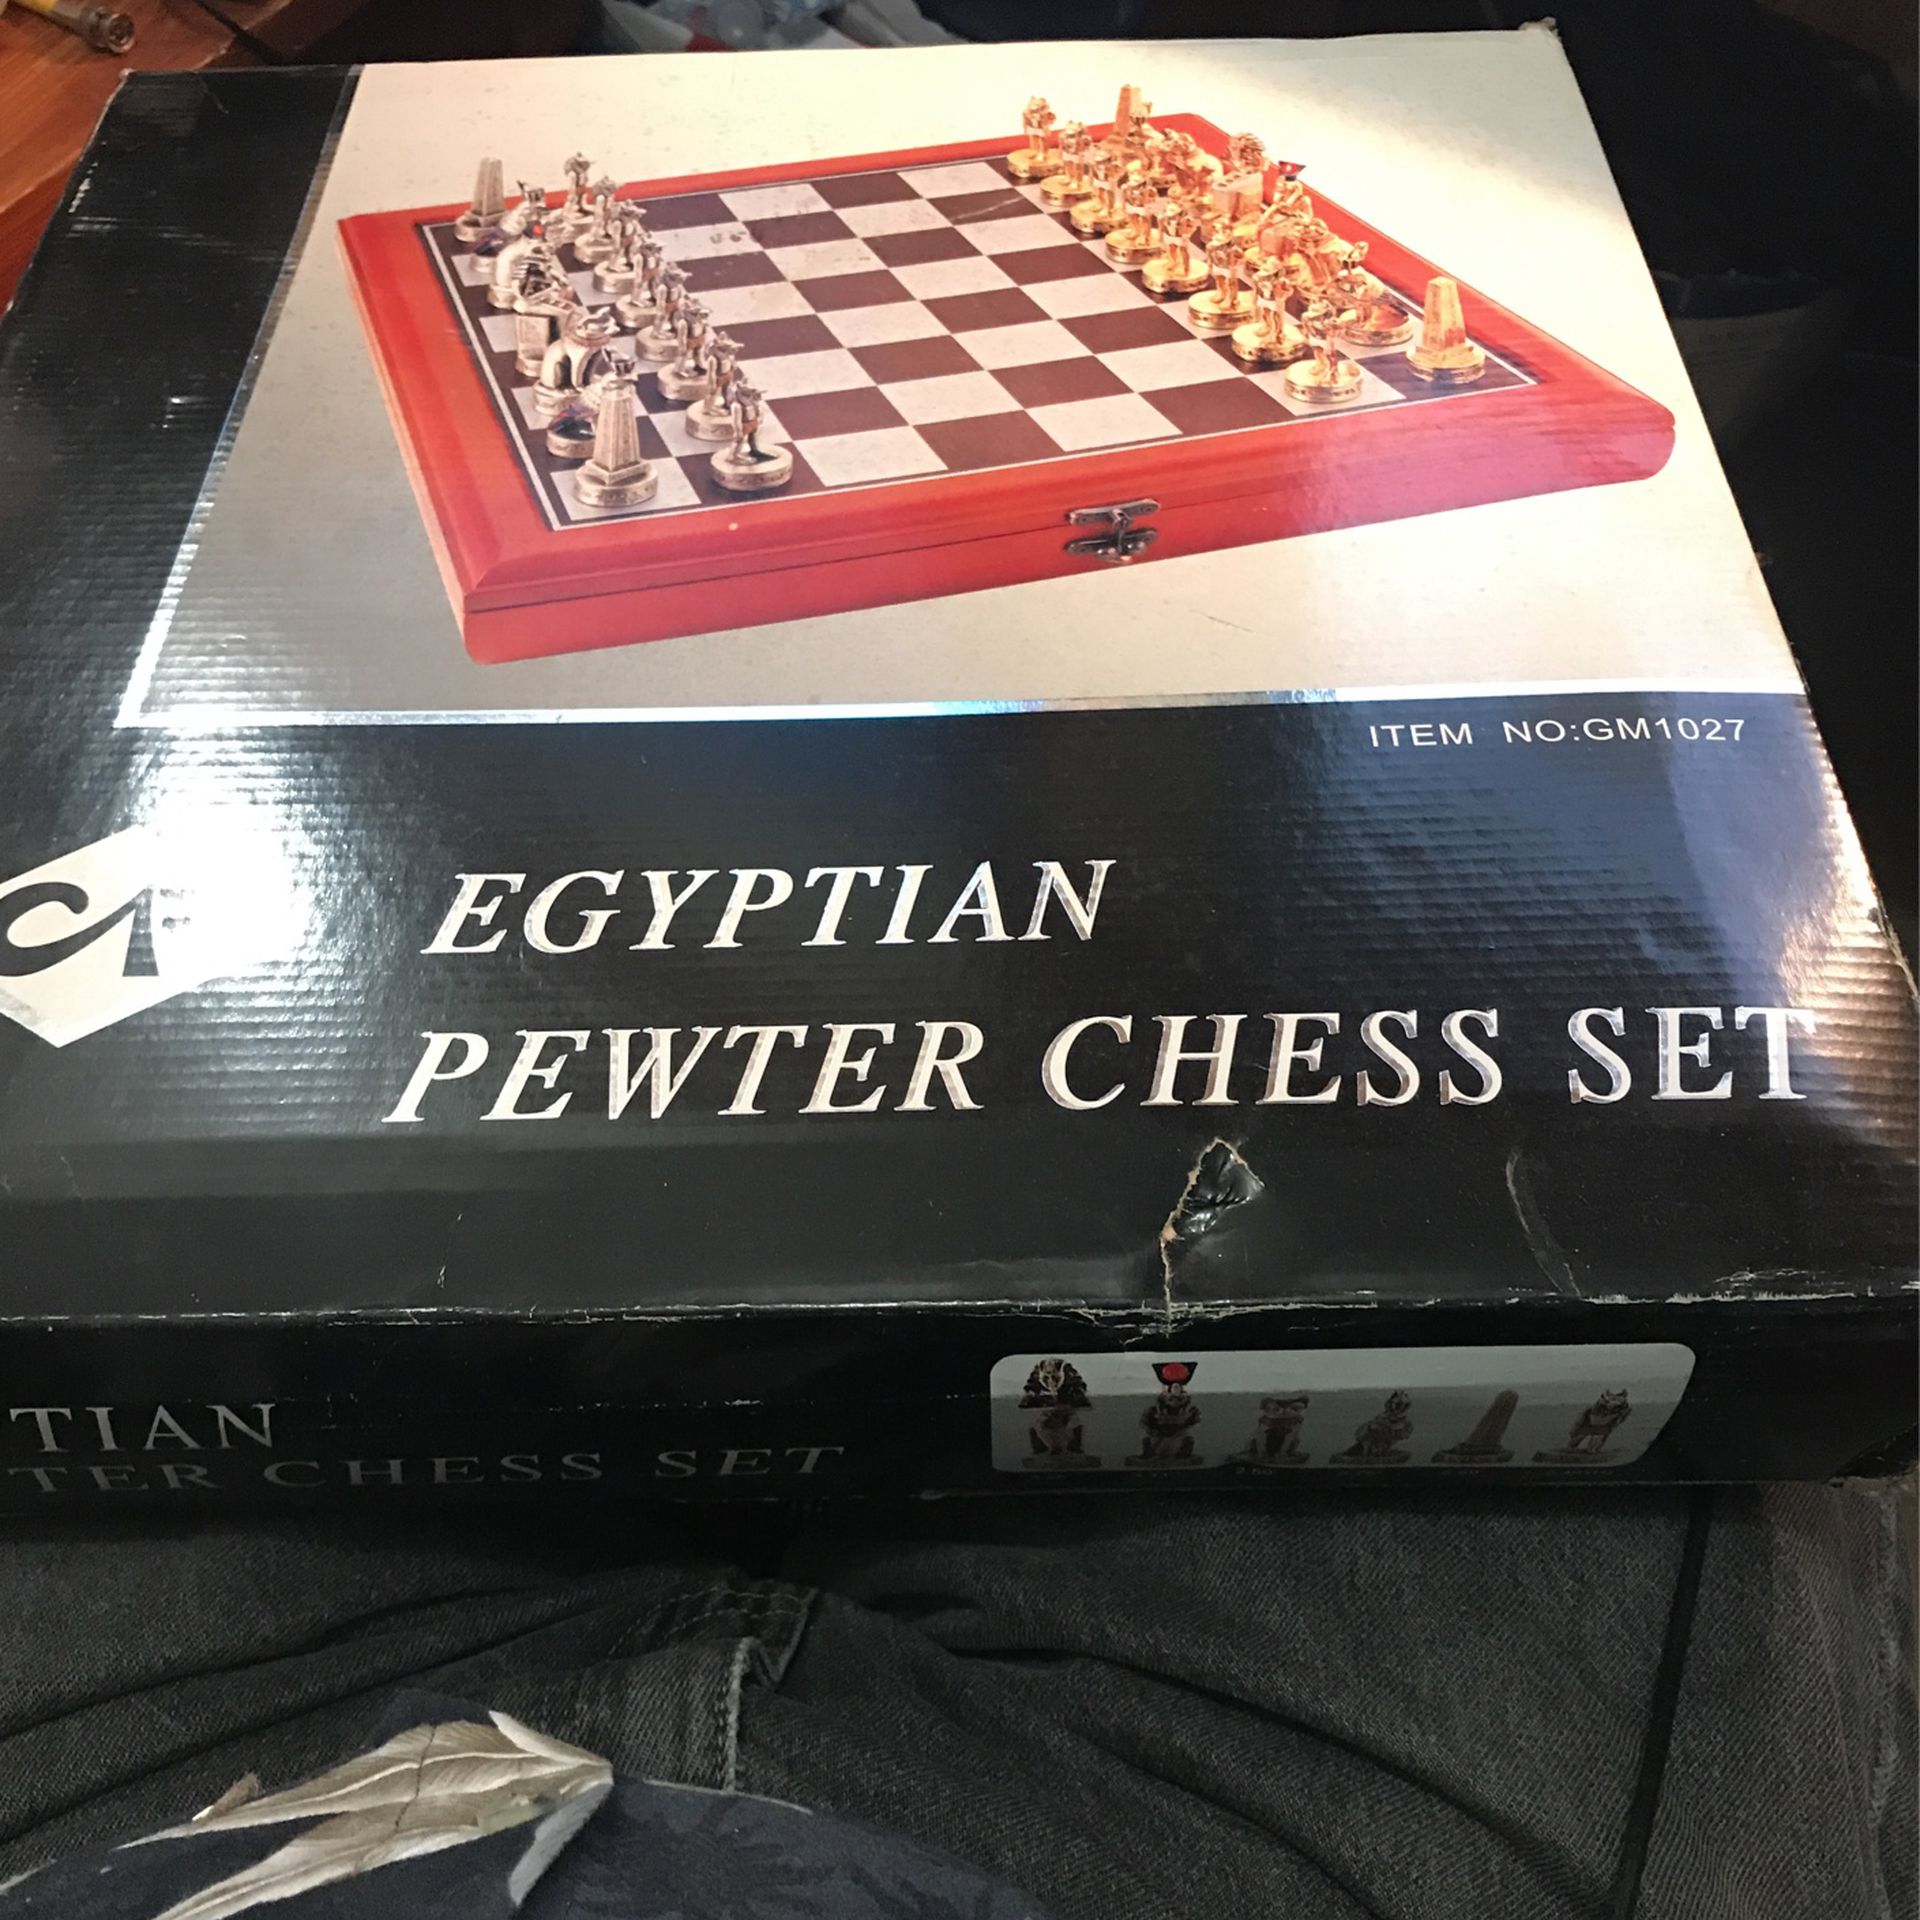 Egyptian pewter chess set - new in box